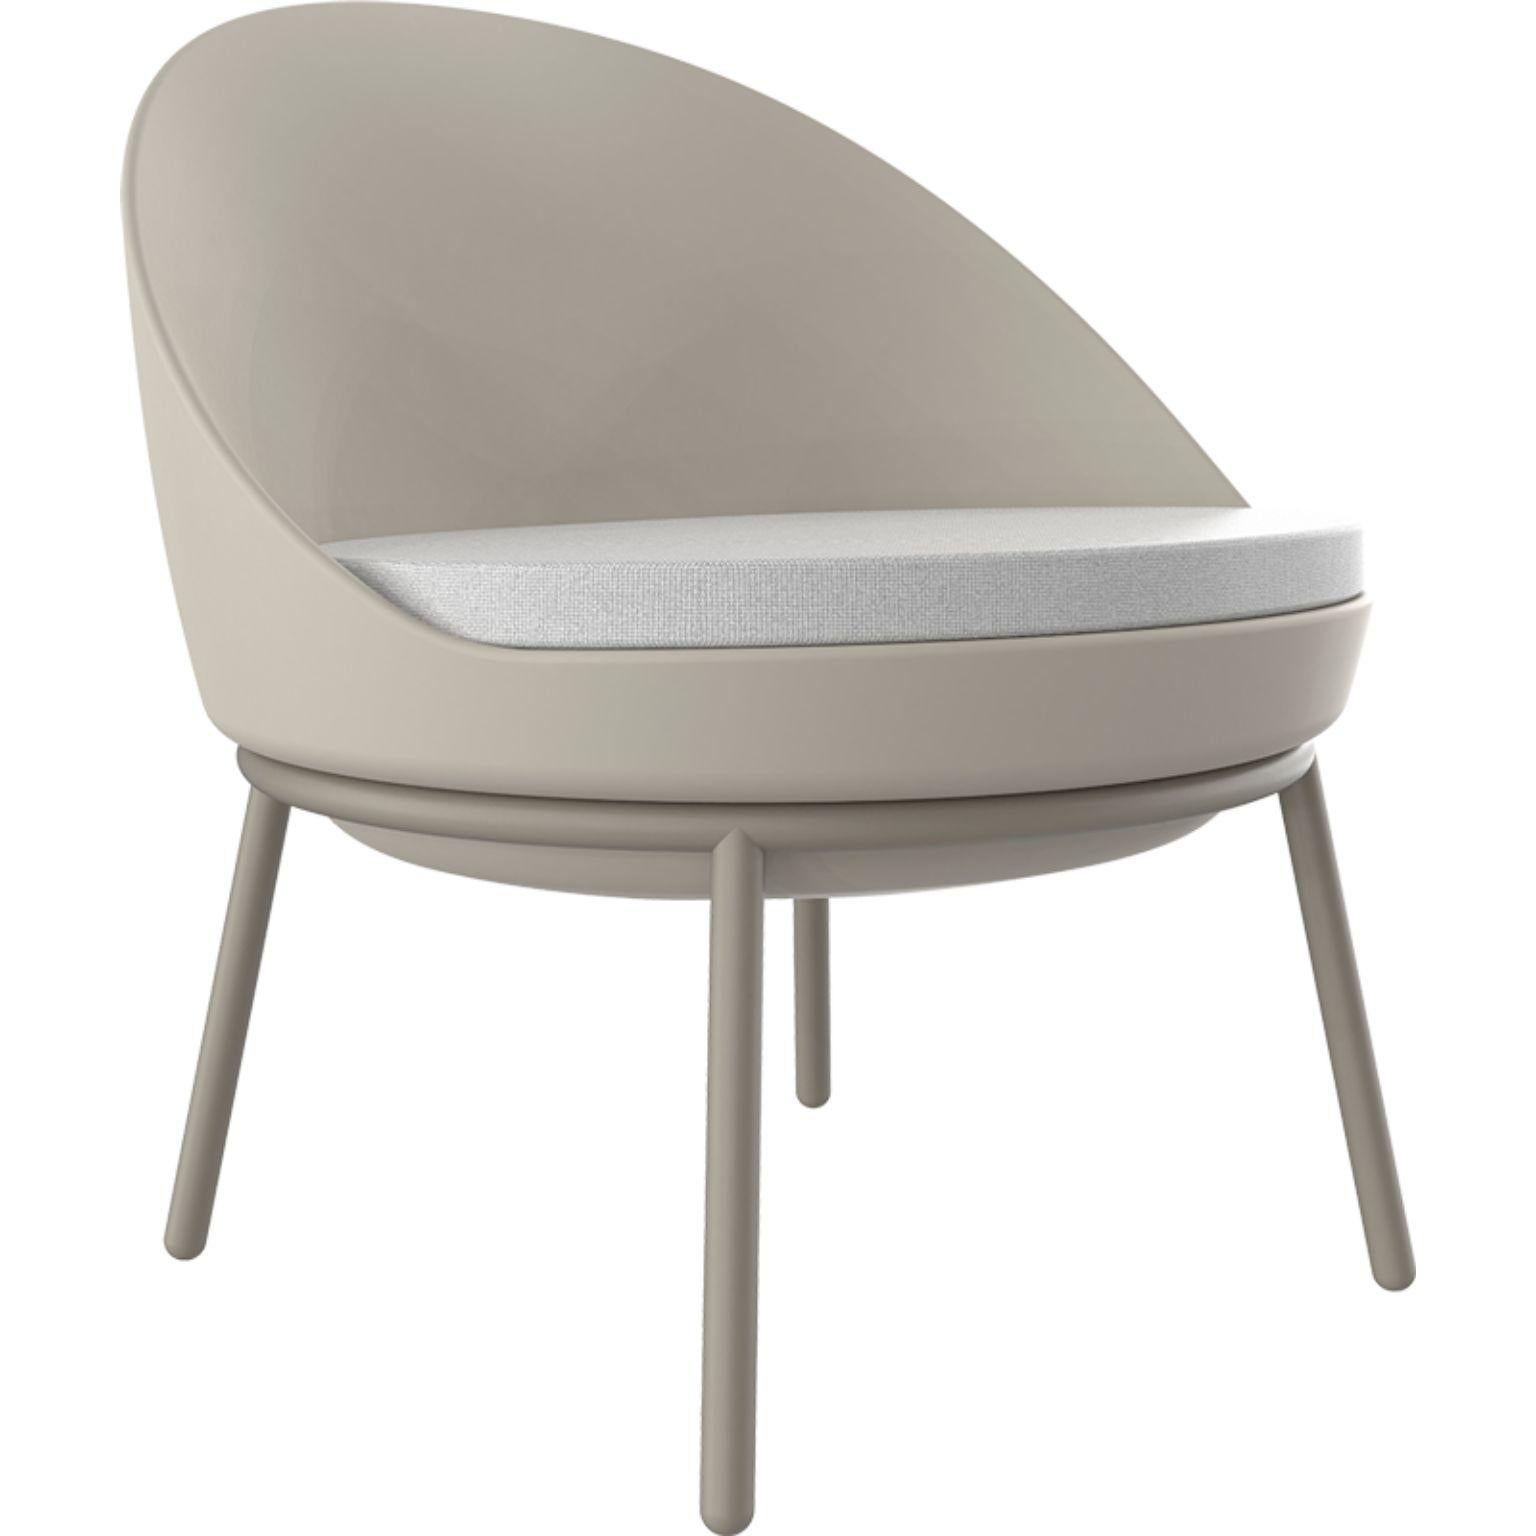 Lace cream lounge chair with cushion by Mowee
Dimensions: D 70 x W 66 x H 75.5 cm
Material: Polyethylene, stainless steel
Weight: 10.5 kg
Also available in different colours and finishes.

Lace is a collection of furniture made by